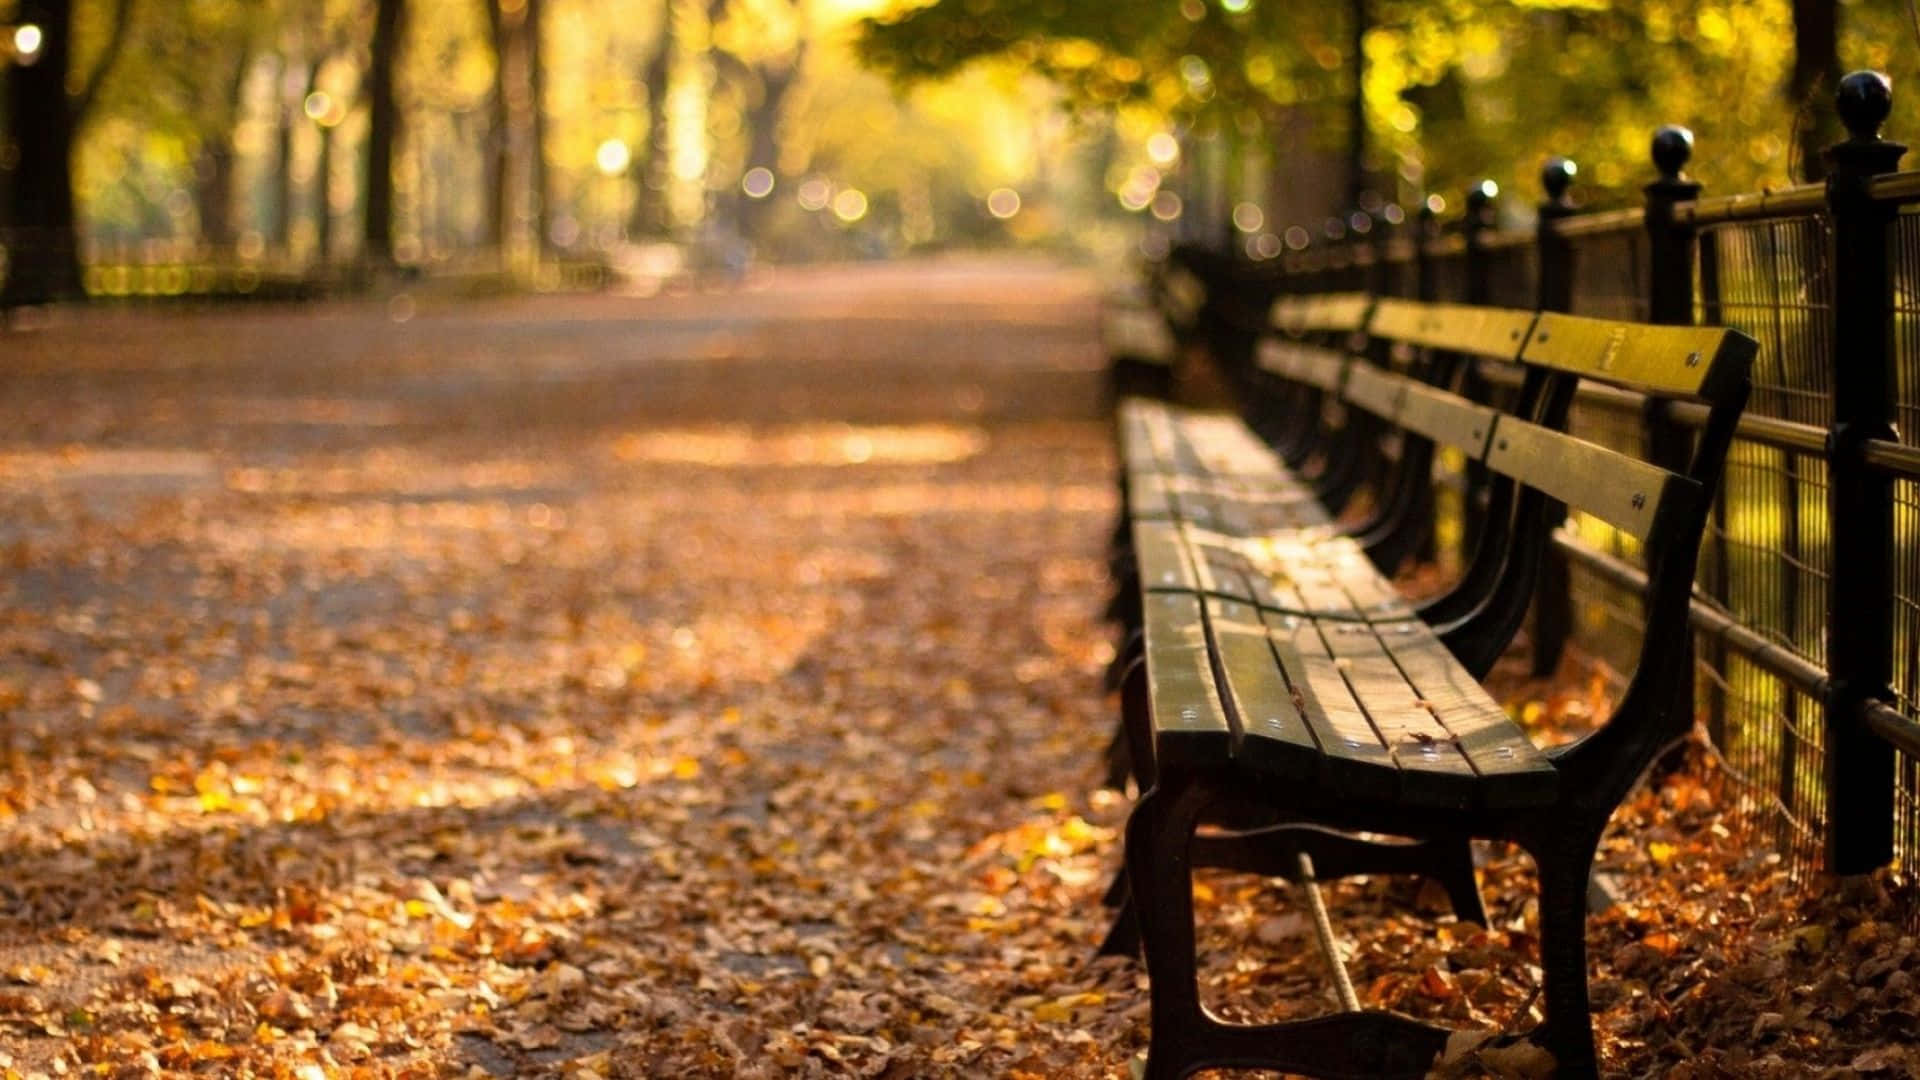 A Bench Is Lined Up In A Park With Leaves